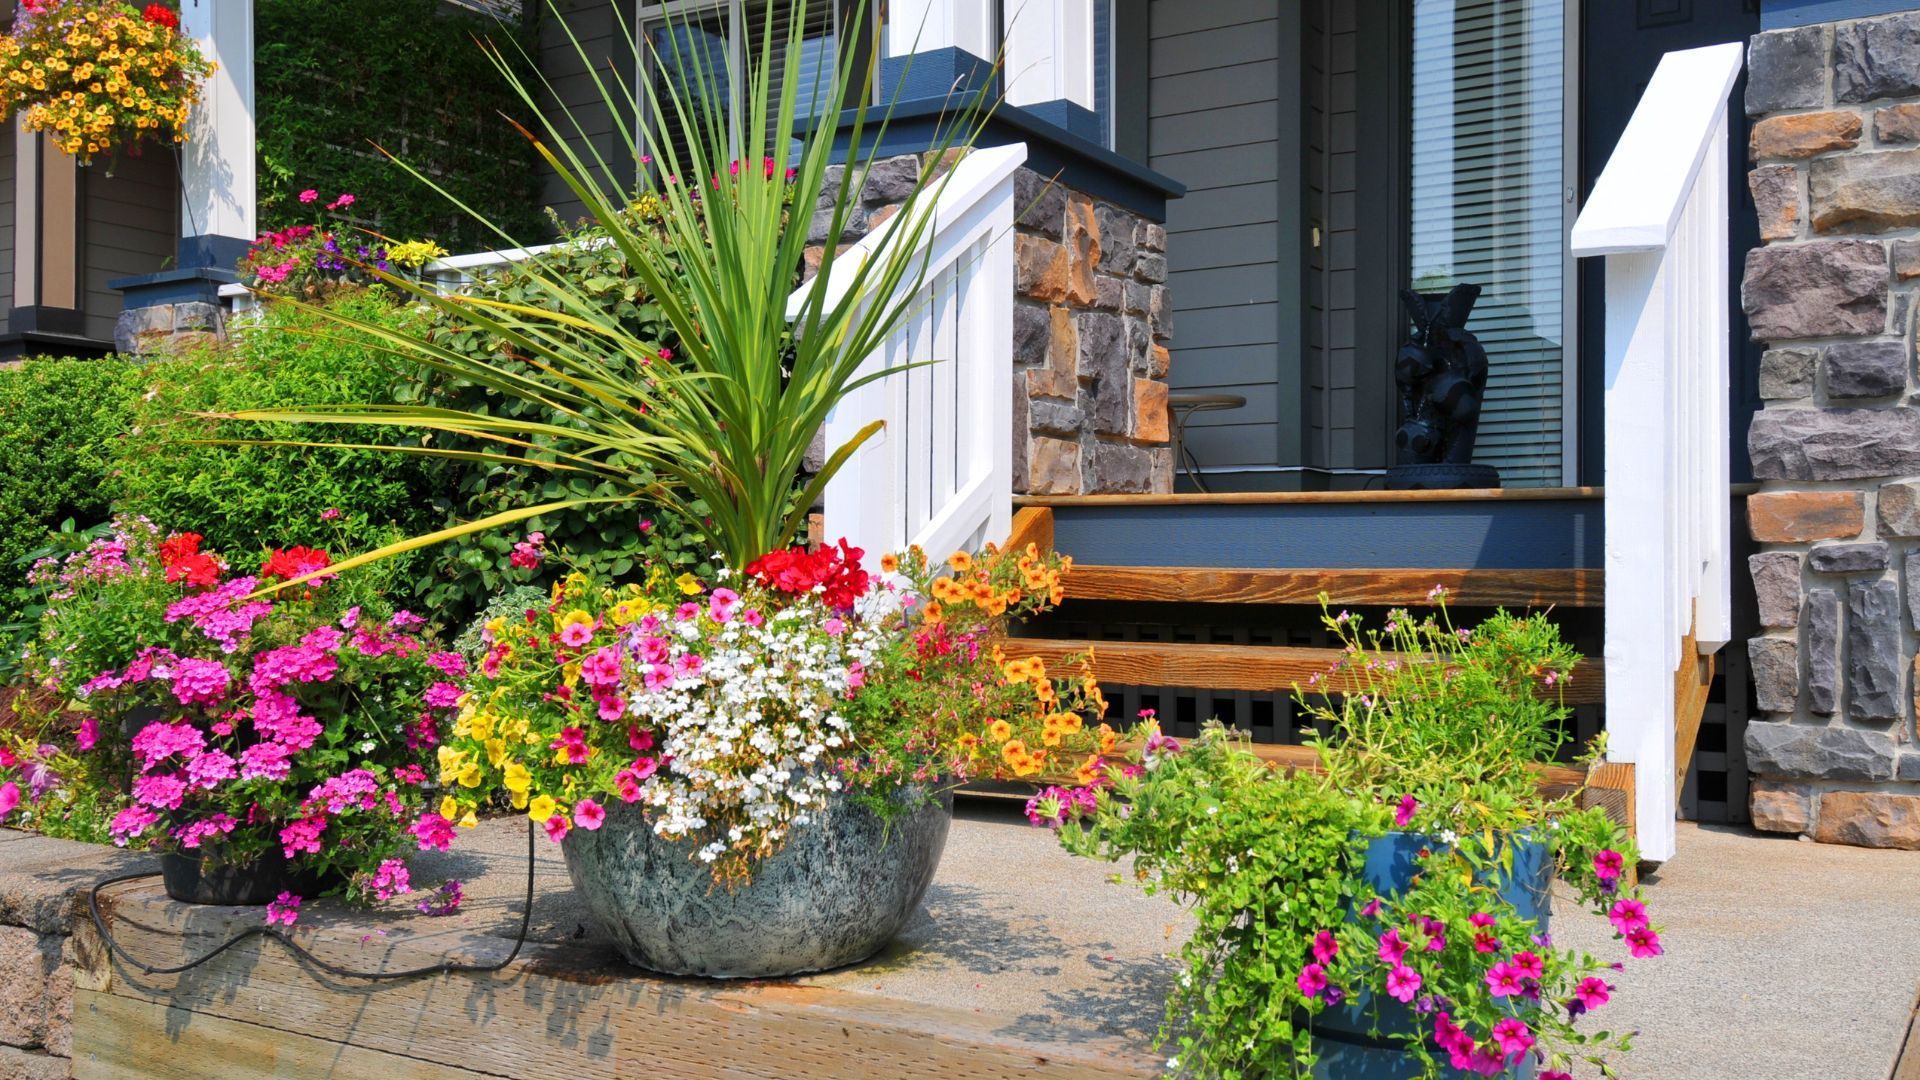 This vivid image captures a lush, vibrant garden at the front of a home in Athens, GA, showcasing a variety of colorful flowers in full bloom. The garden features a mix of pink, yellow, red, and white flowers, potted in large decorative containers and surrounded by lush greenery. A wooden deck with a small staircase leads up to the home's entrance, flanked by stone columns and a dark blue siding with white accents, creating a welcoming and picturesque scene.